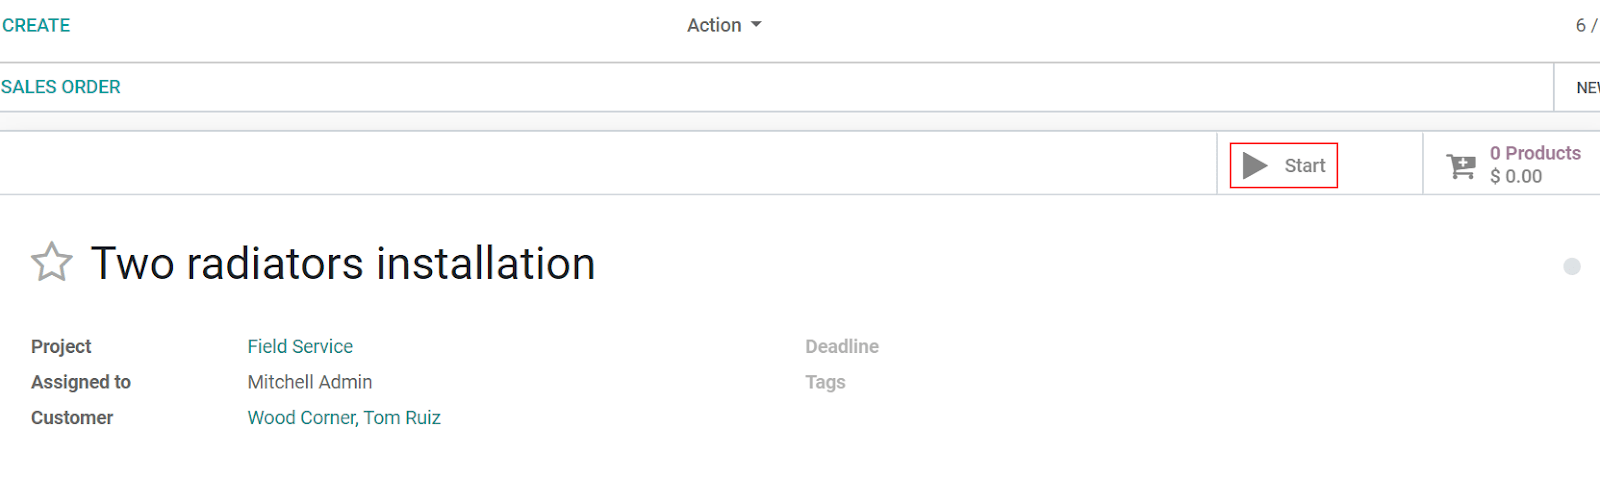 Click on start in the task to initiate the timer in Odoo Project Application